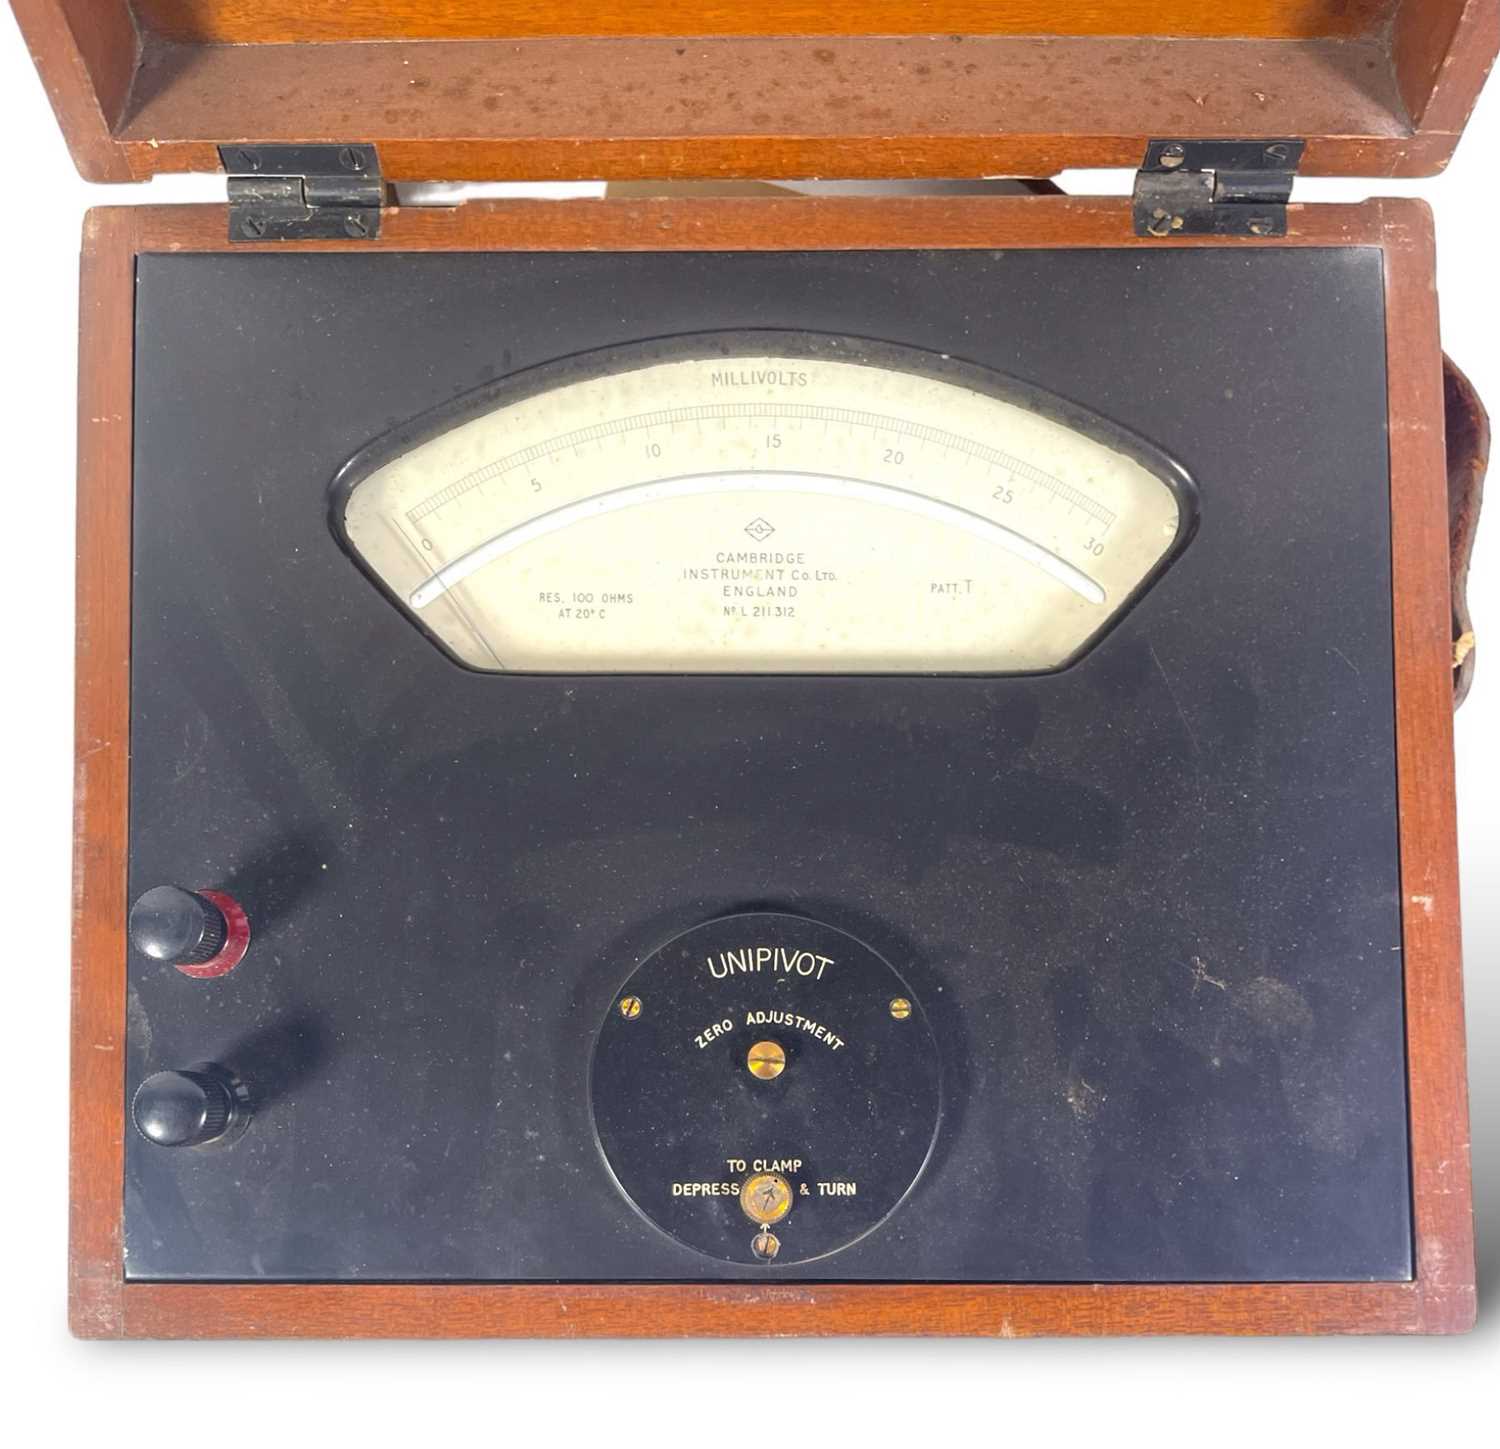 BBC HERITAGE COLLECTION - MILIVOT METER. - Image 3 of 3